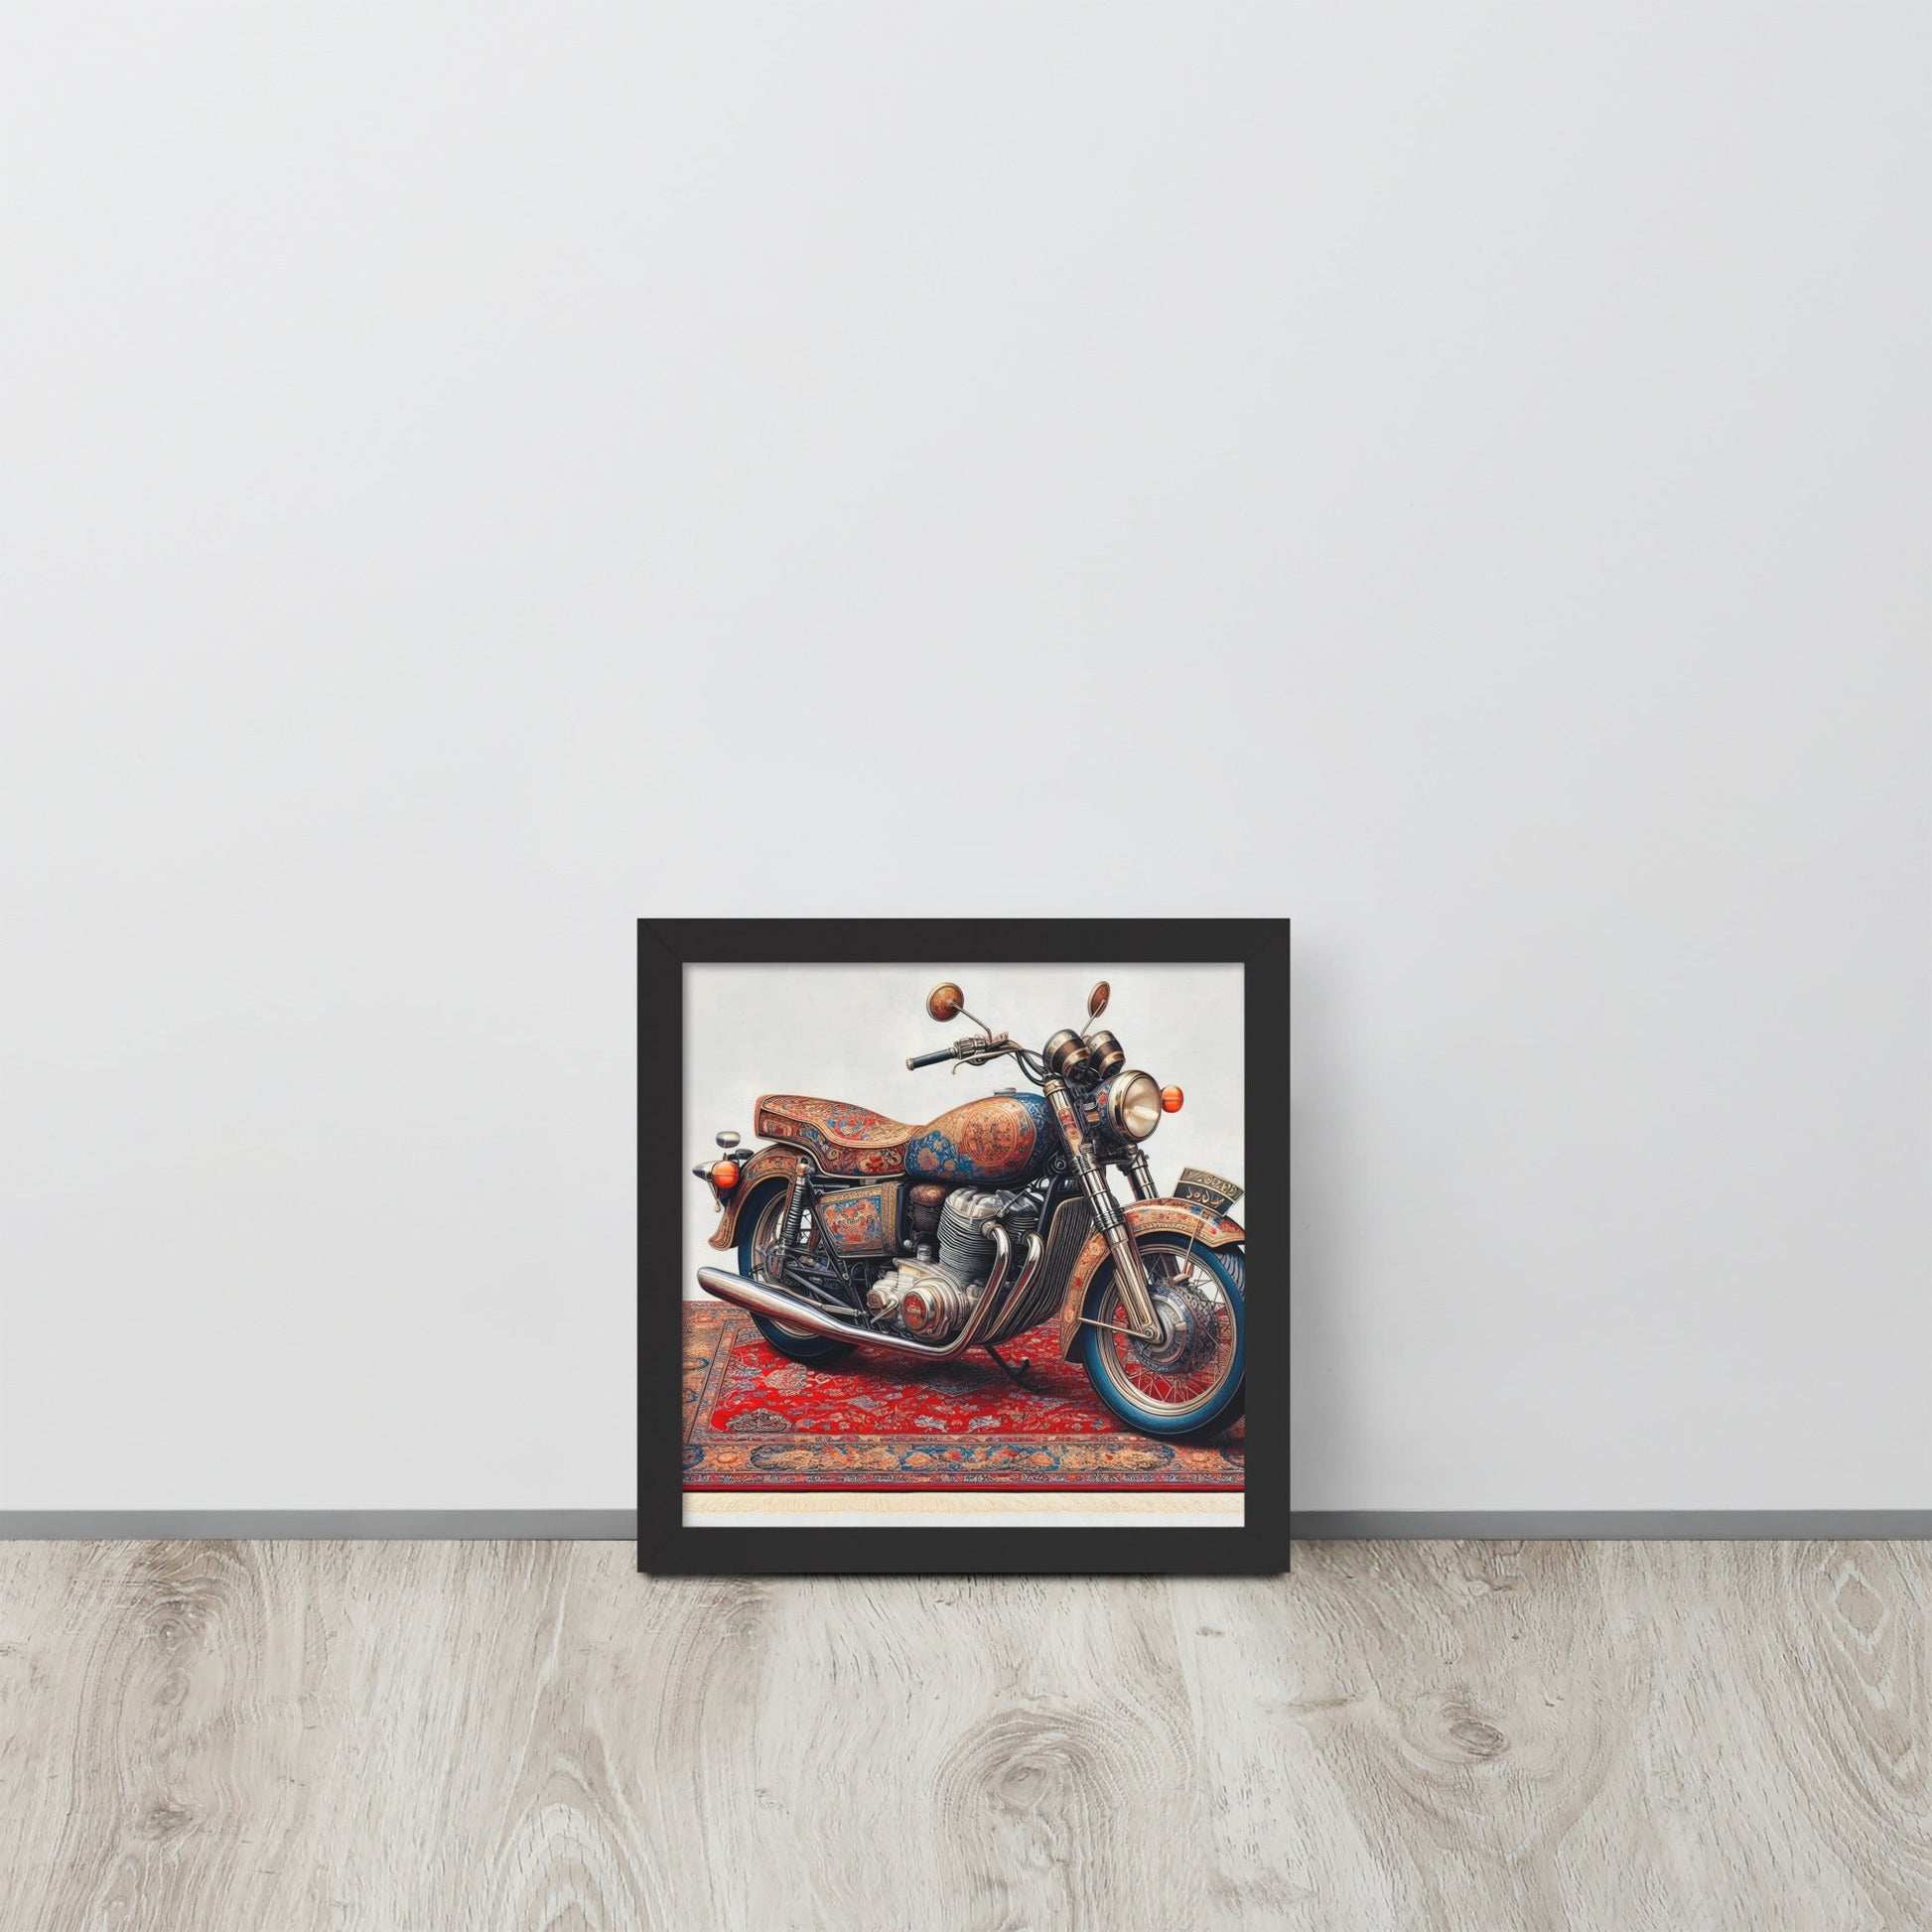 PERSIAN STYLE MOTORCYCLE Wall Art Framed Poster - Bonotee